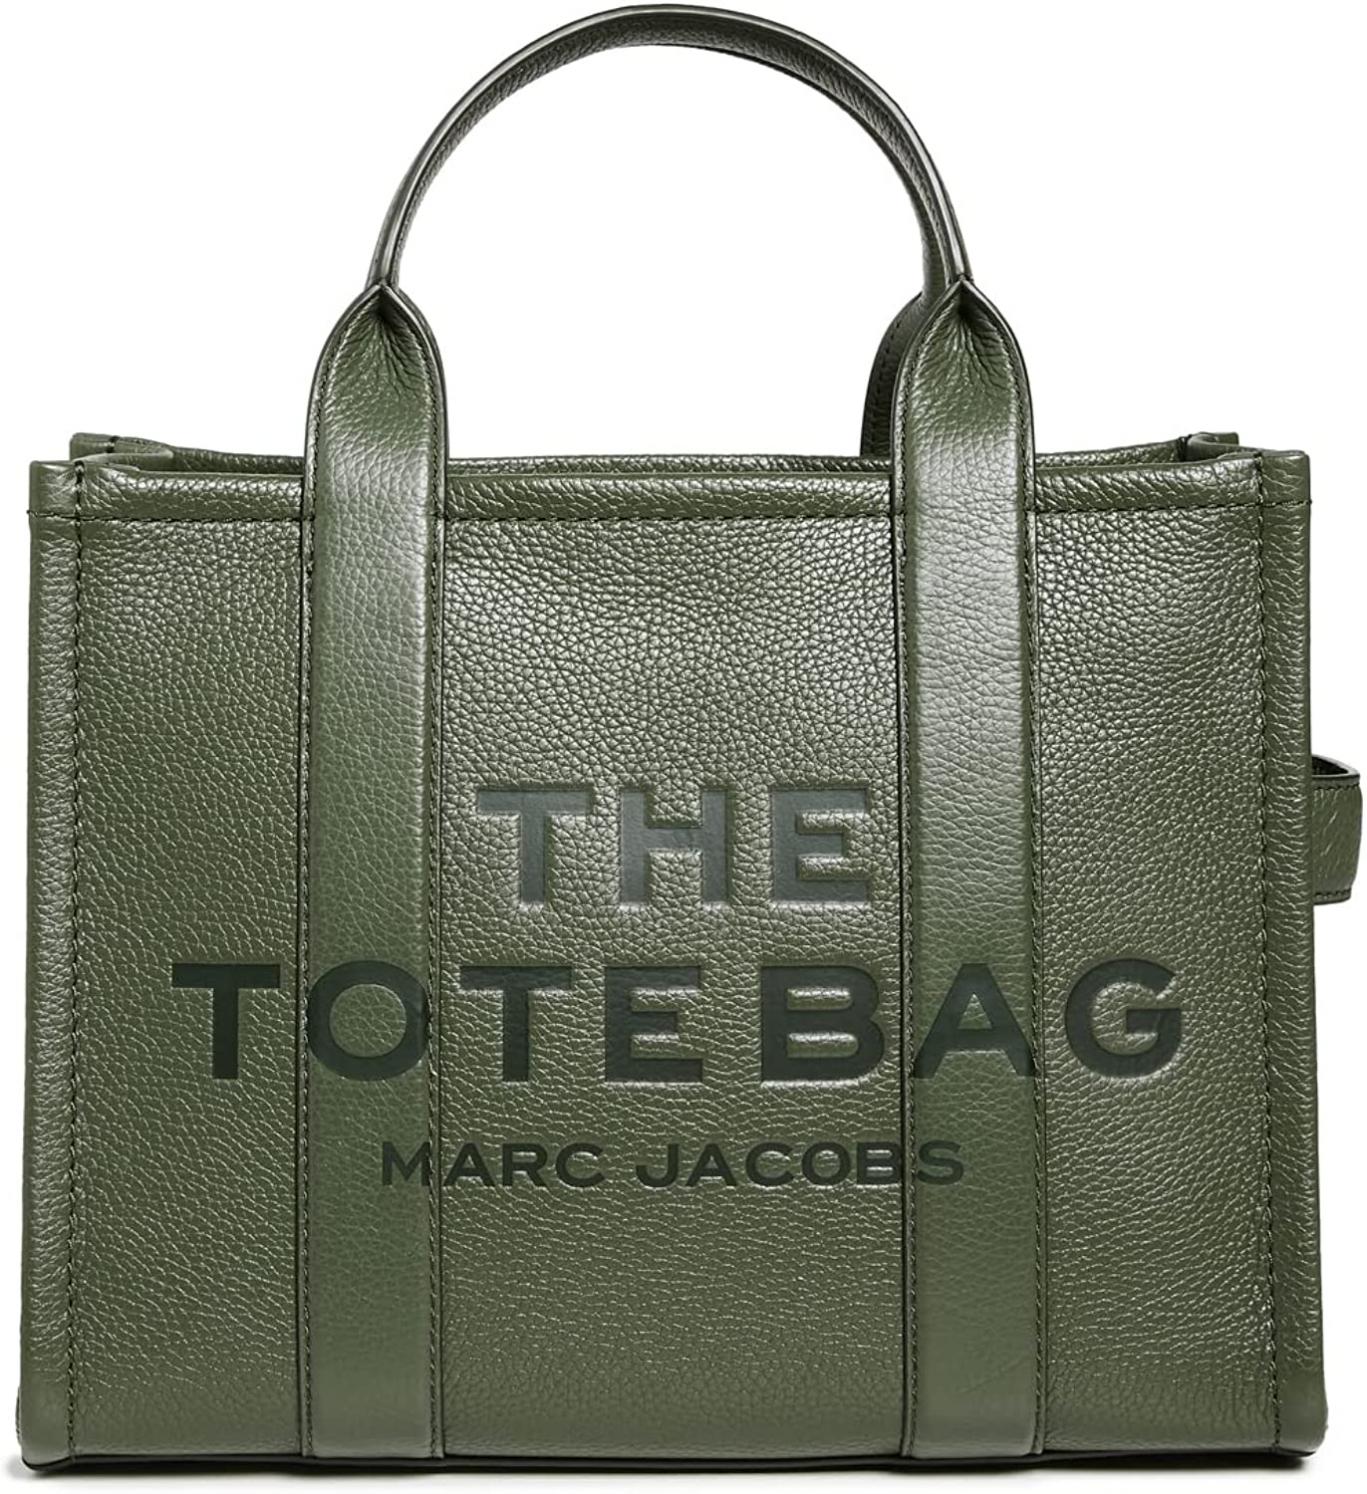 Marc Jacobs Women's The Small Tote